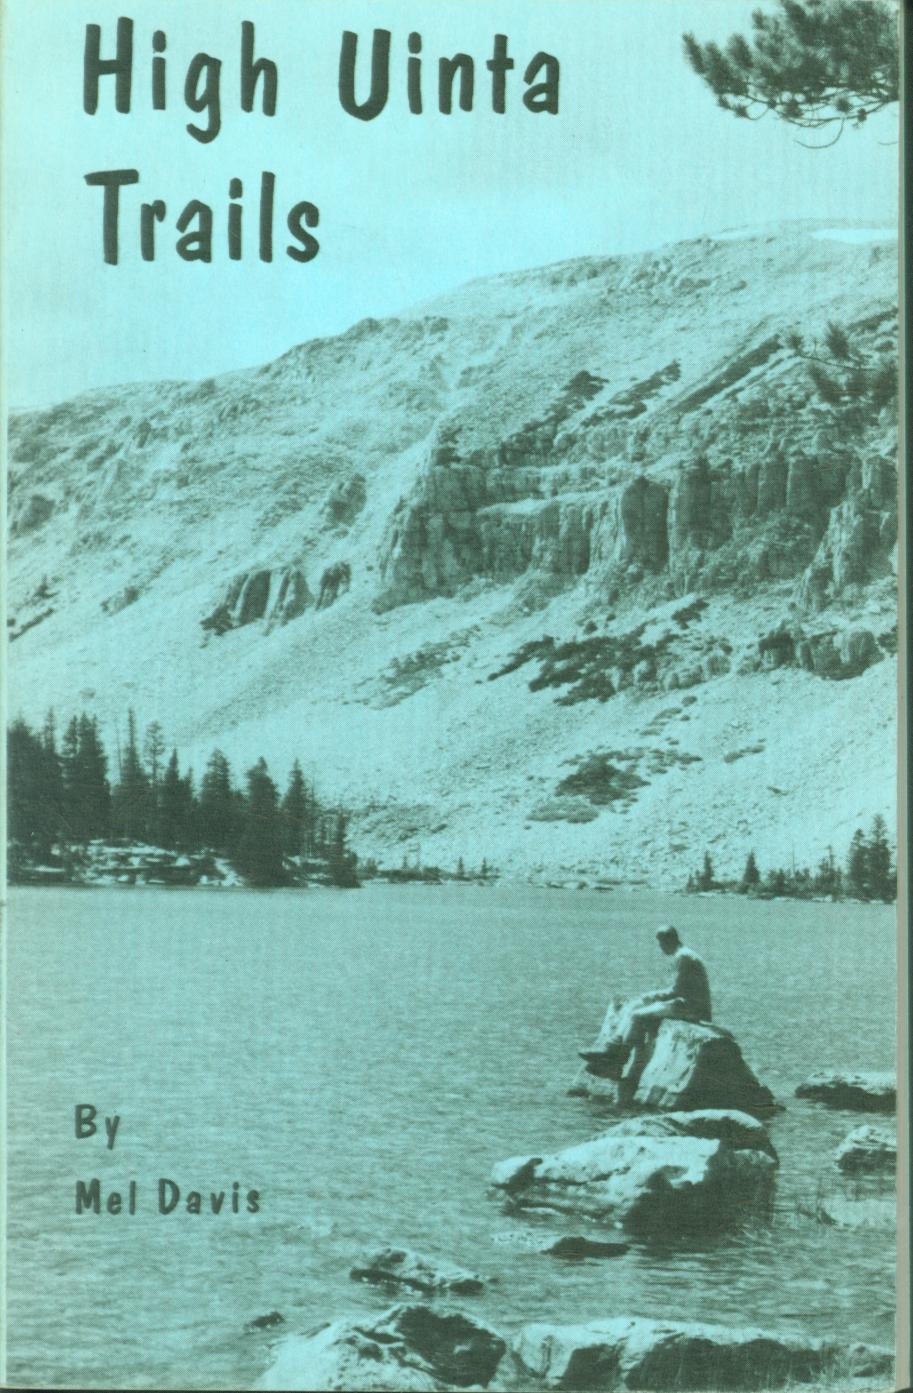 HIGH UINTA TRAILS: a hiking guide to the trails and lakes in the Uinta Mountains of Utah.